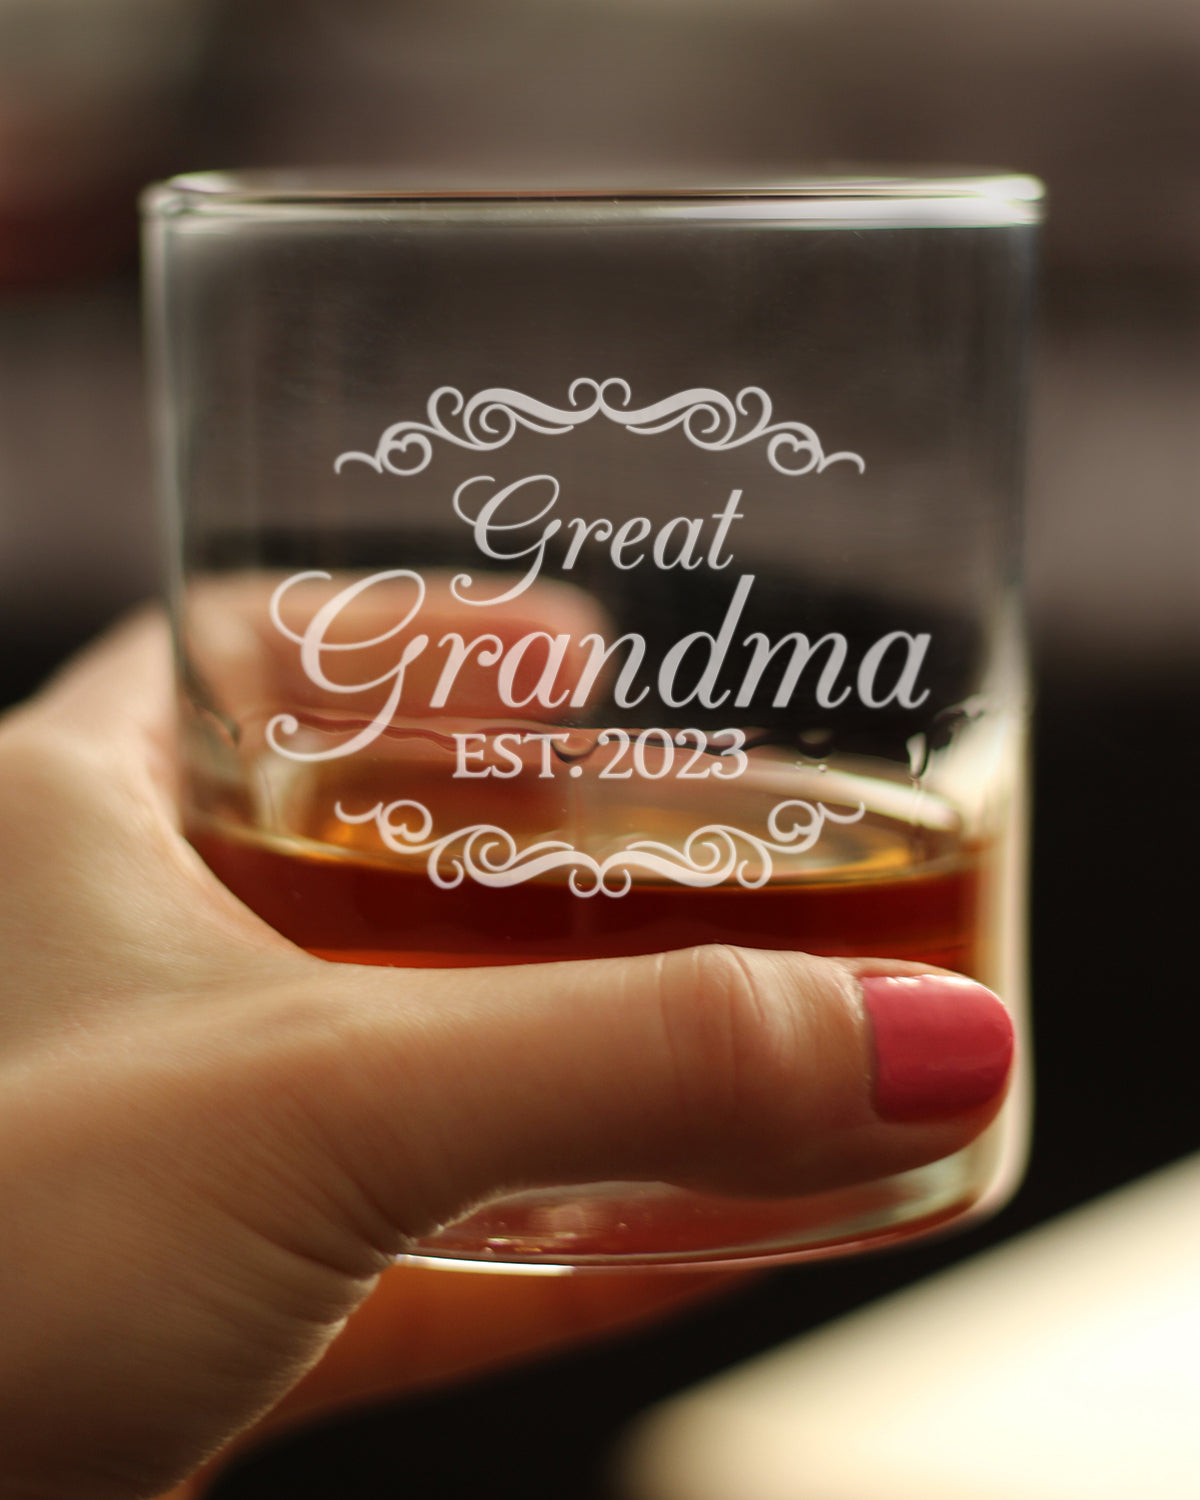 Great Grandma Est 2023 - New Great Grandmother Whiskey Rocks Glass Gift for First Time Great Grandparents - Decorative 10.25 Oz Glasses